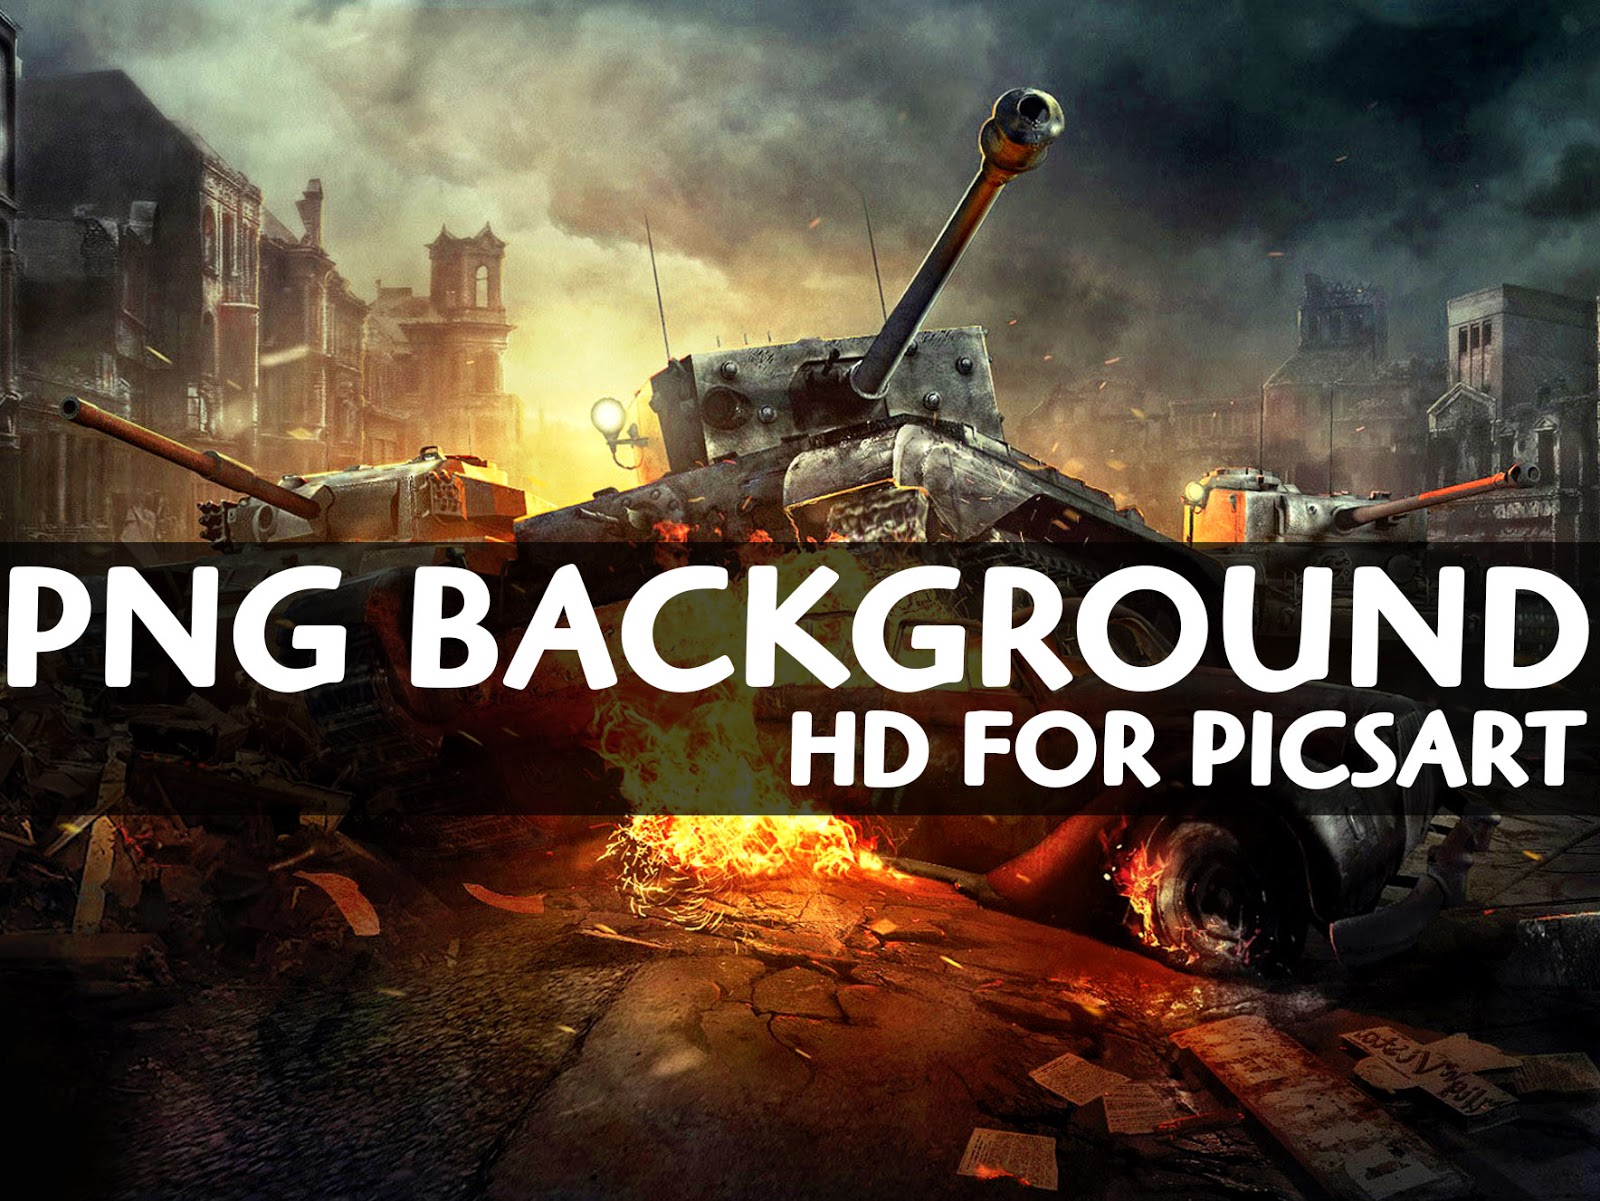 Png Background Hd For Picsart Download 2020